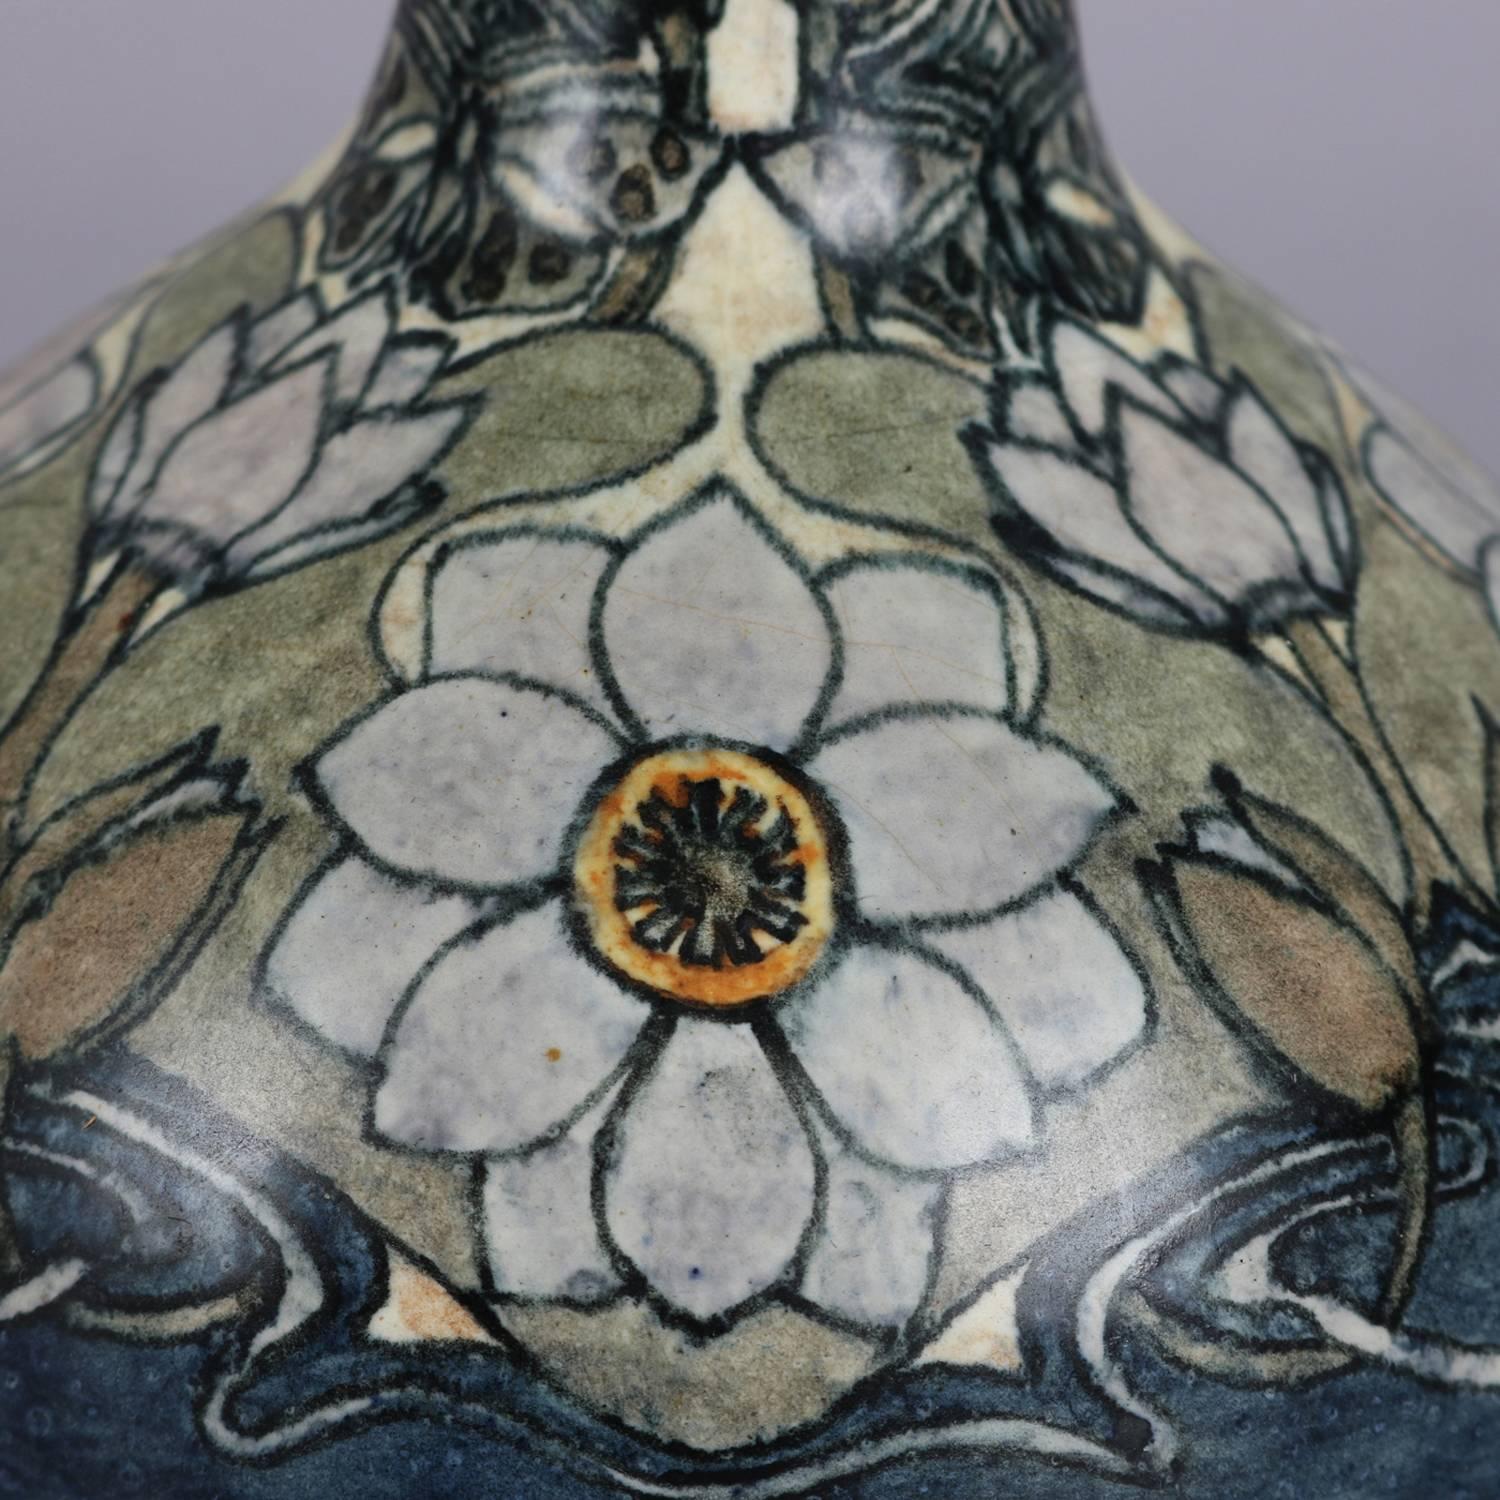 Arts & Crafts Gouda School art pottery bud vase features bulbous base with stylized floral motif, signed Holland Utrecht, circa 1910.

Measures: 12